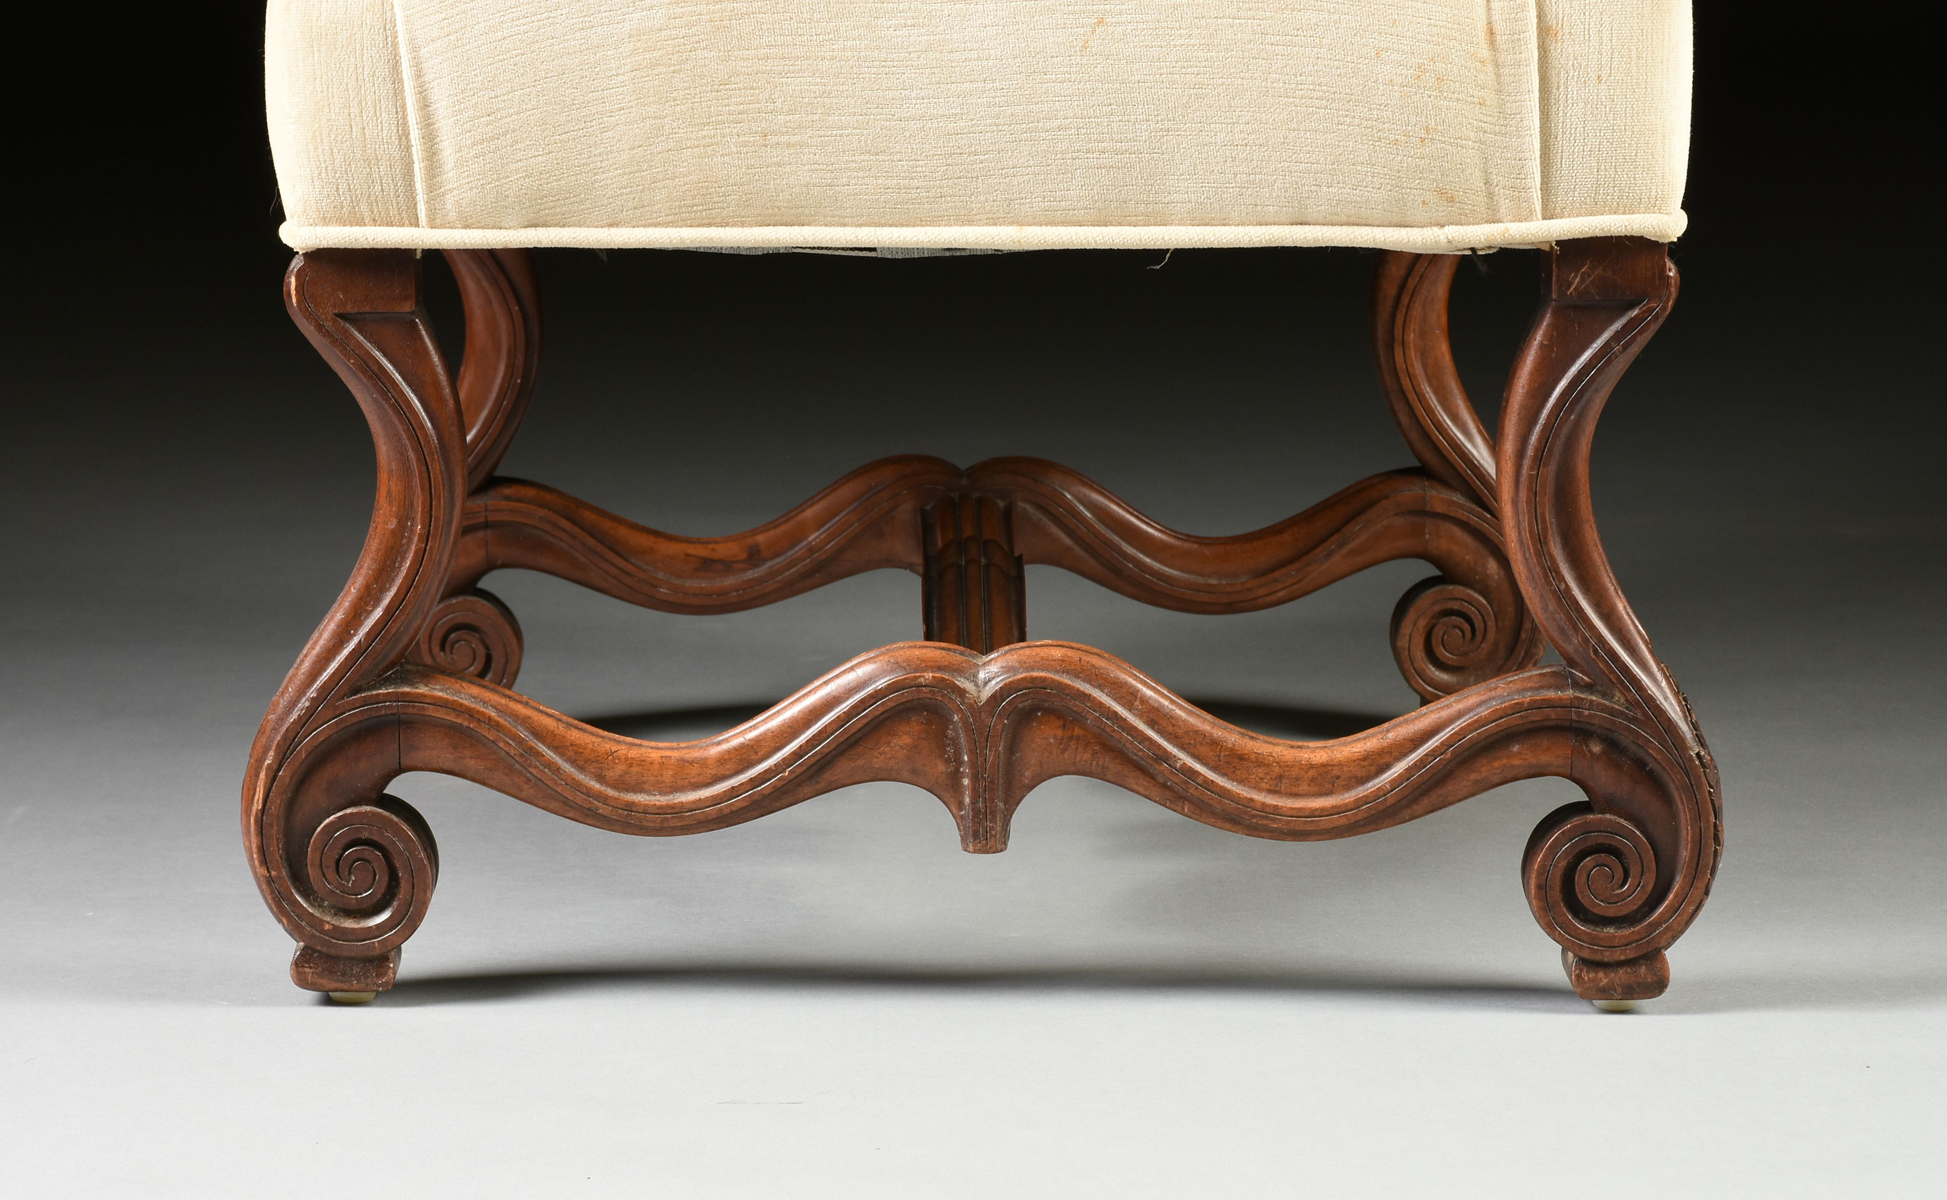 A LOUIS XIV STYLE VELVET UPHOLSTERED AND CARVED WALNUT ARMCHAIR, LATE 19TH/EARLY 20TH CENTURY, the - Image 9 of 10